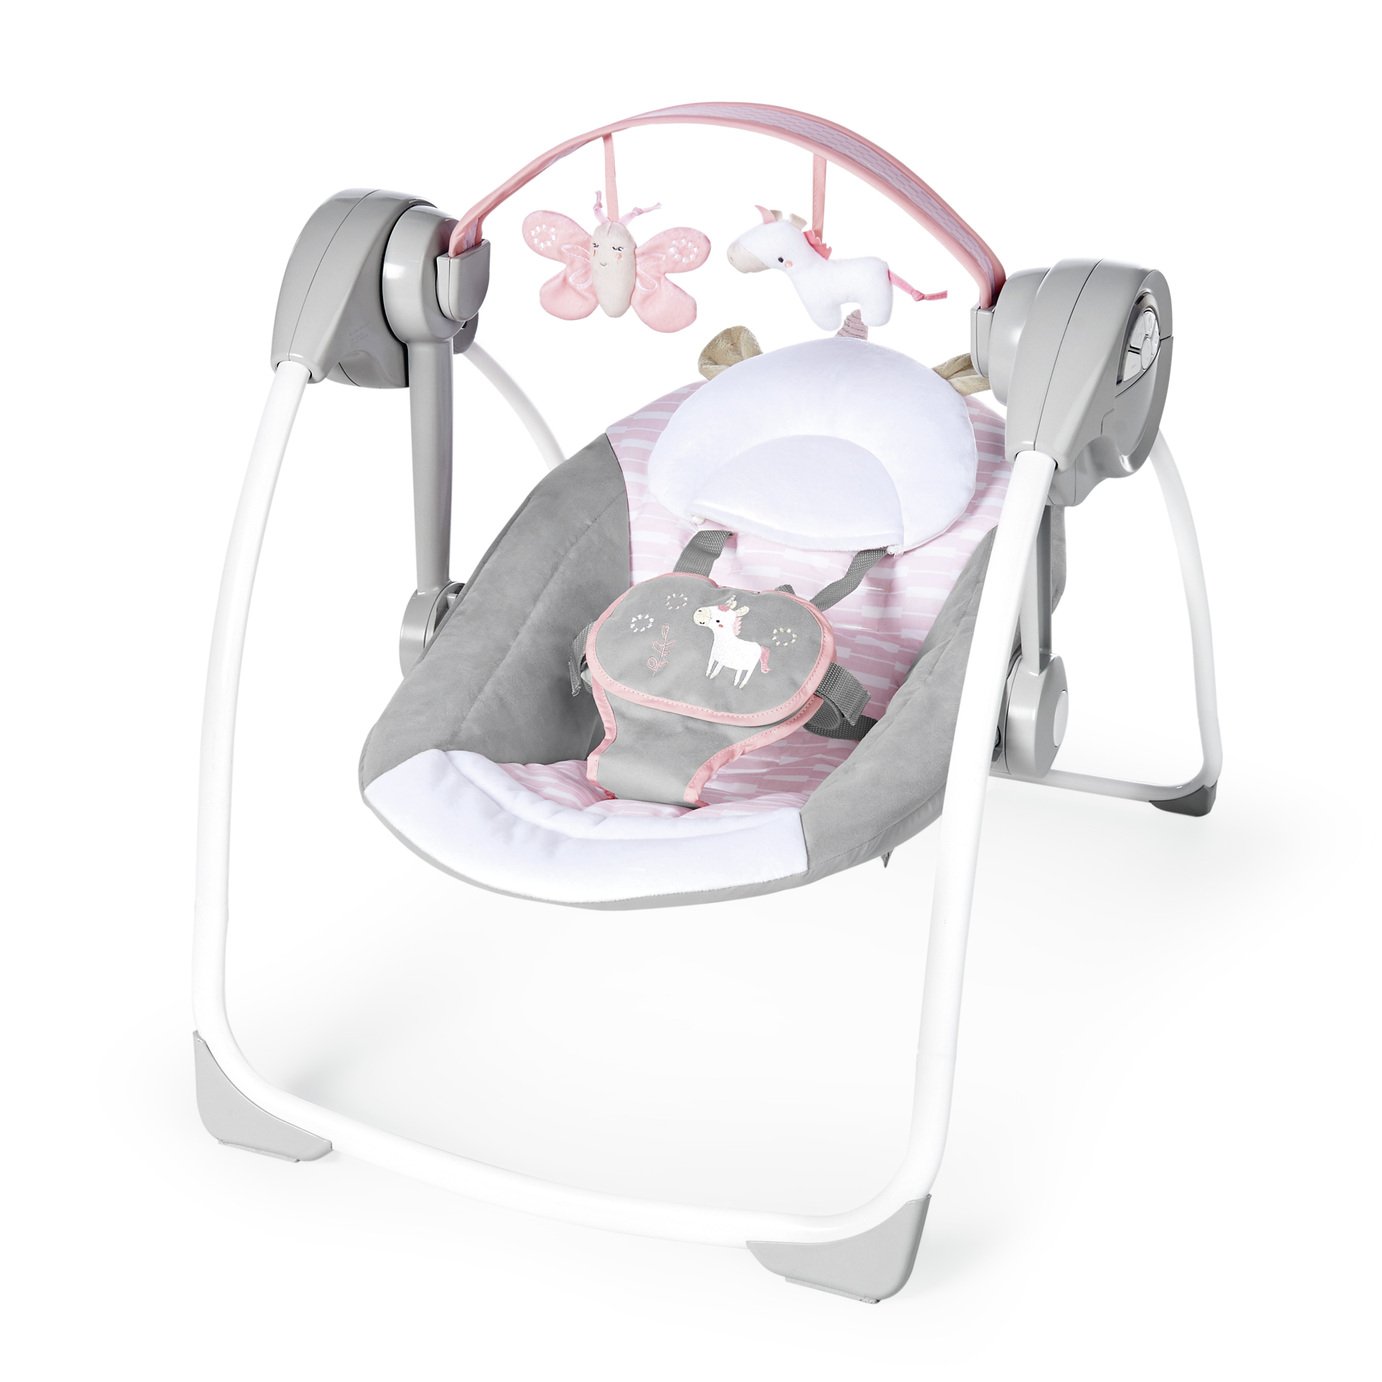 Ingenuity Portable Swing review